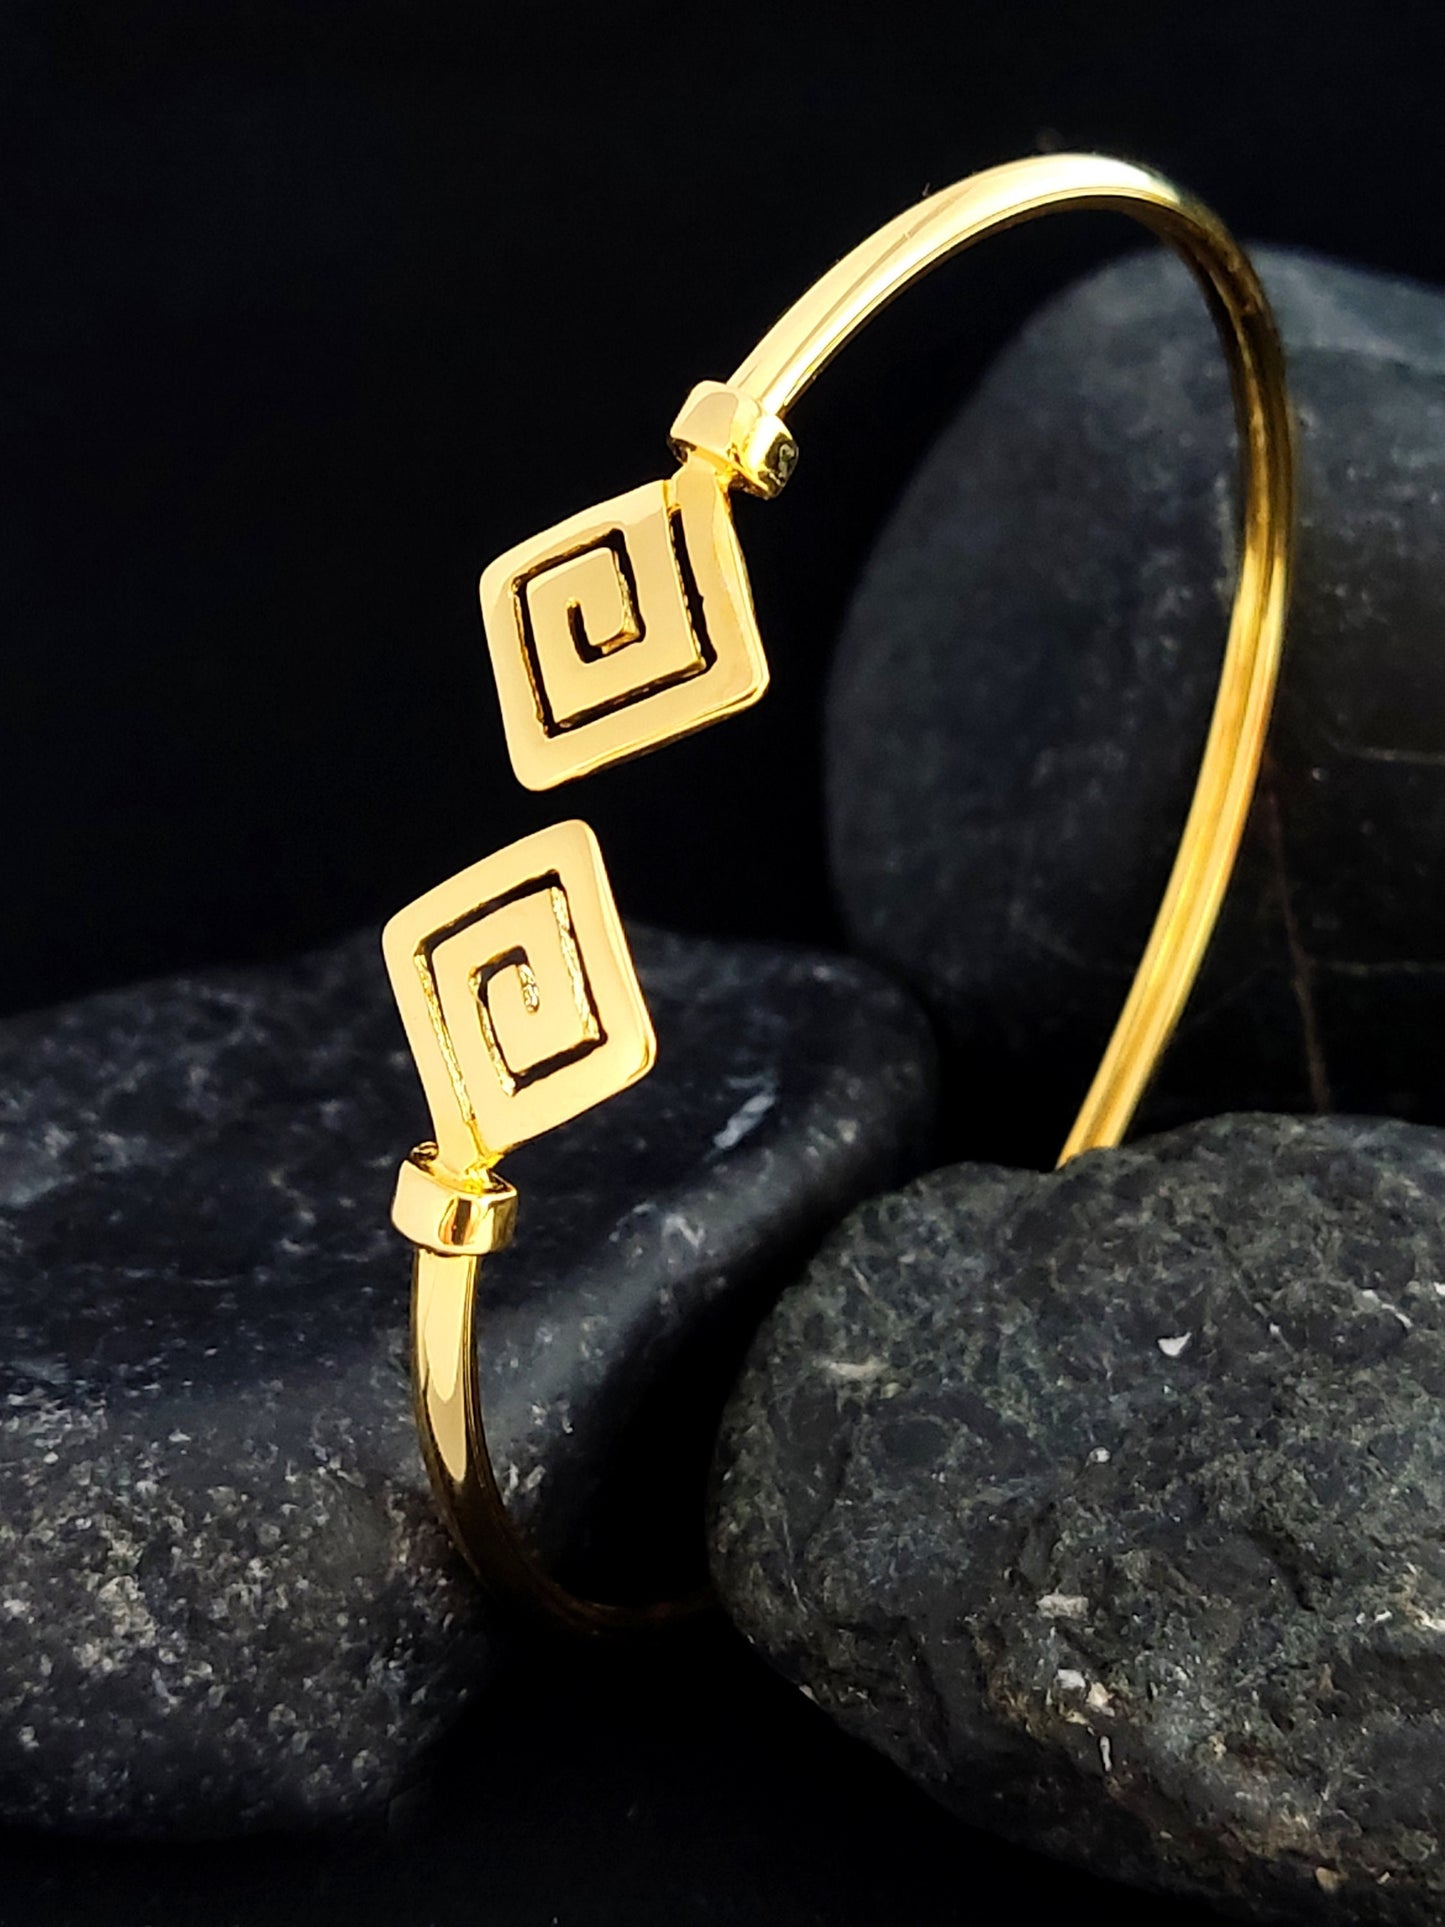 Elevate your style with our authentic Greek Sterling Silver 925 Cuff Bracelet, adorned with luxurious 22K gold plating and featuring an ancient Greek meander design. Handcrafted in Greece with meticulous attention to detail. Free shipping available. Shop now!